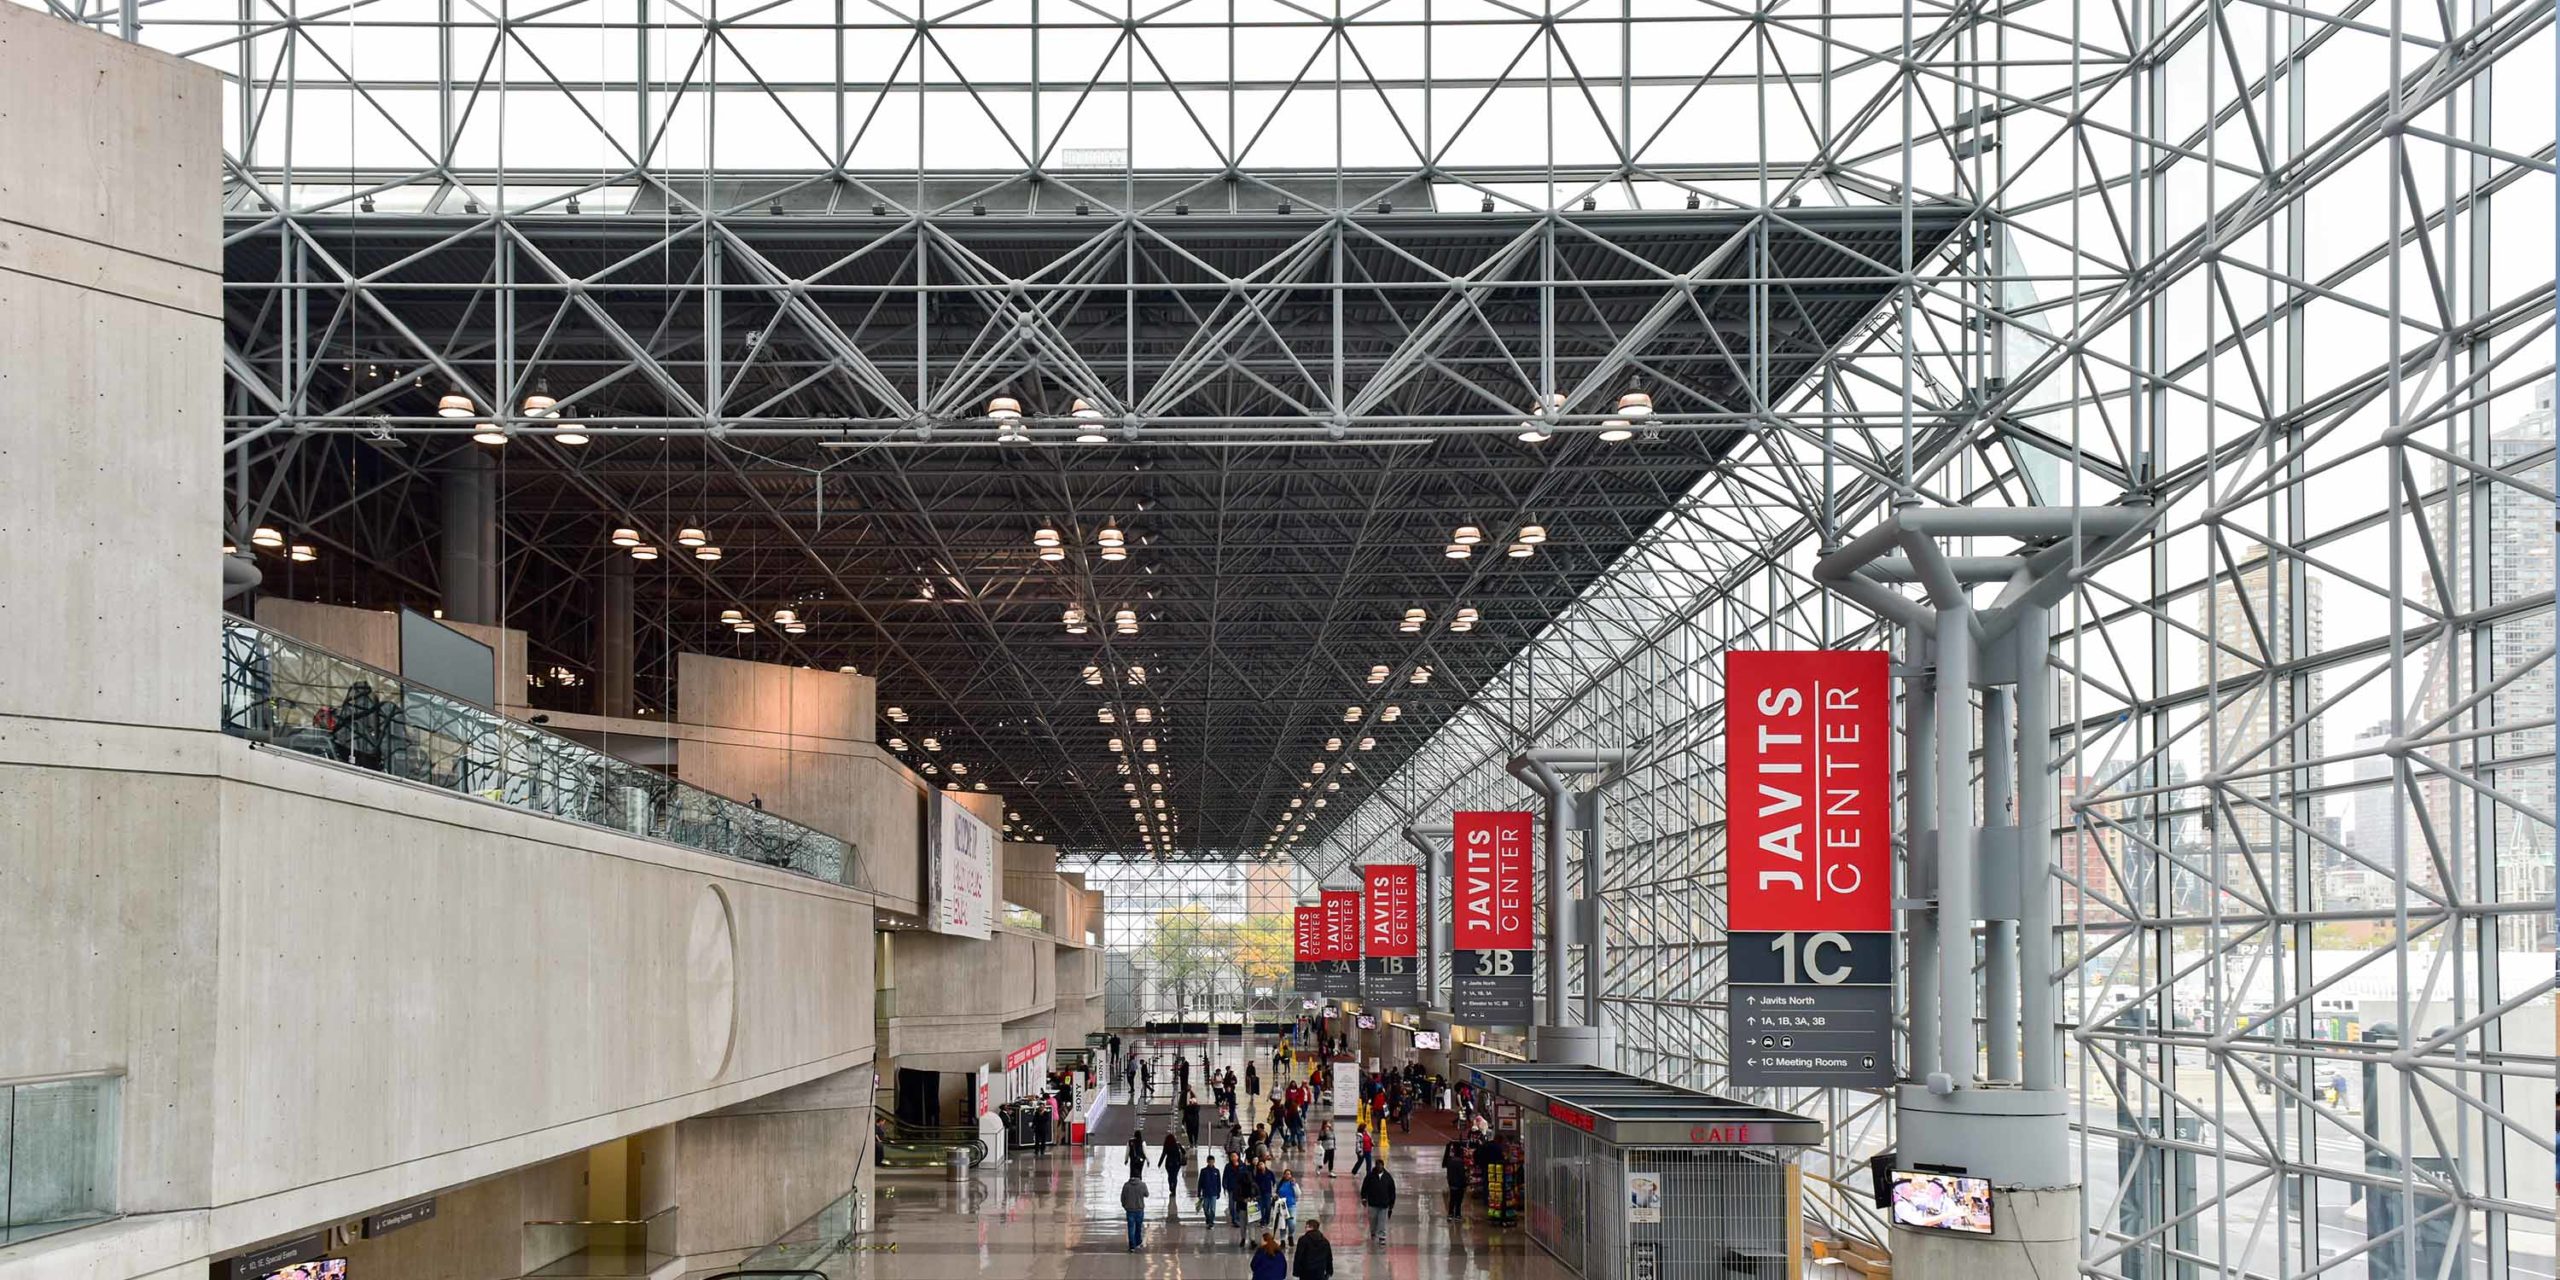 Project Image showing Jacob K. Javits Convention Center